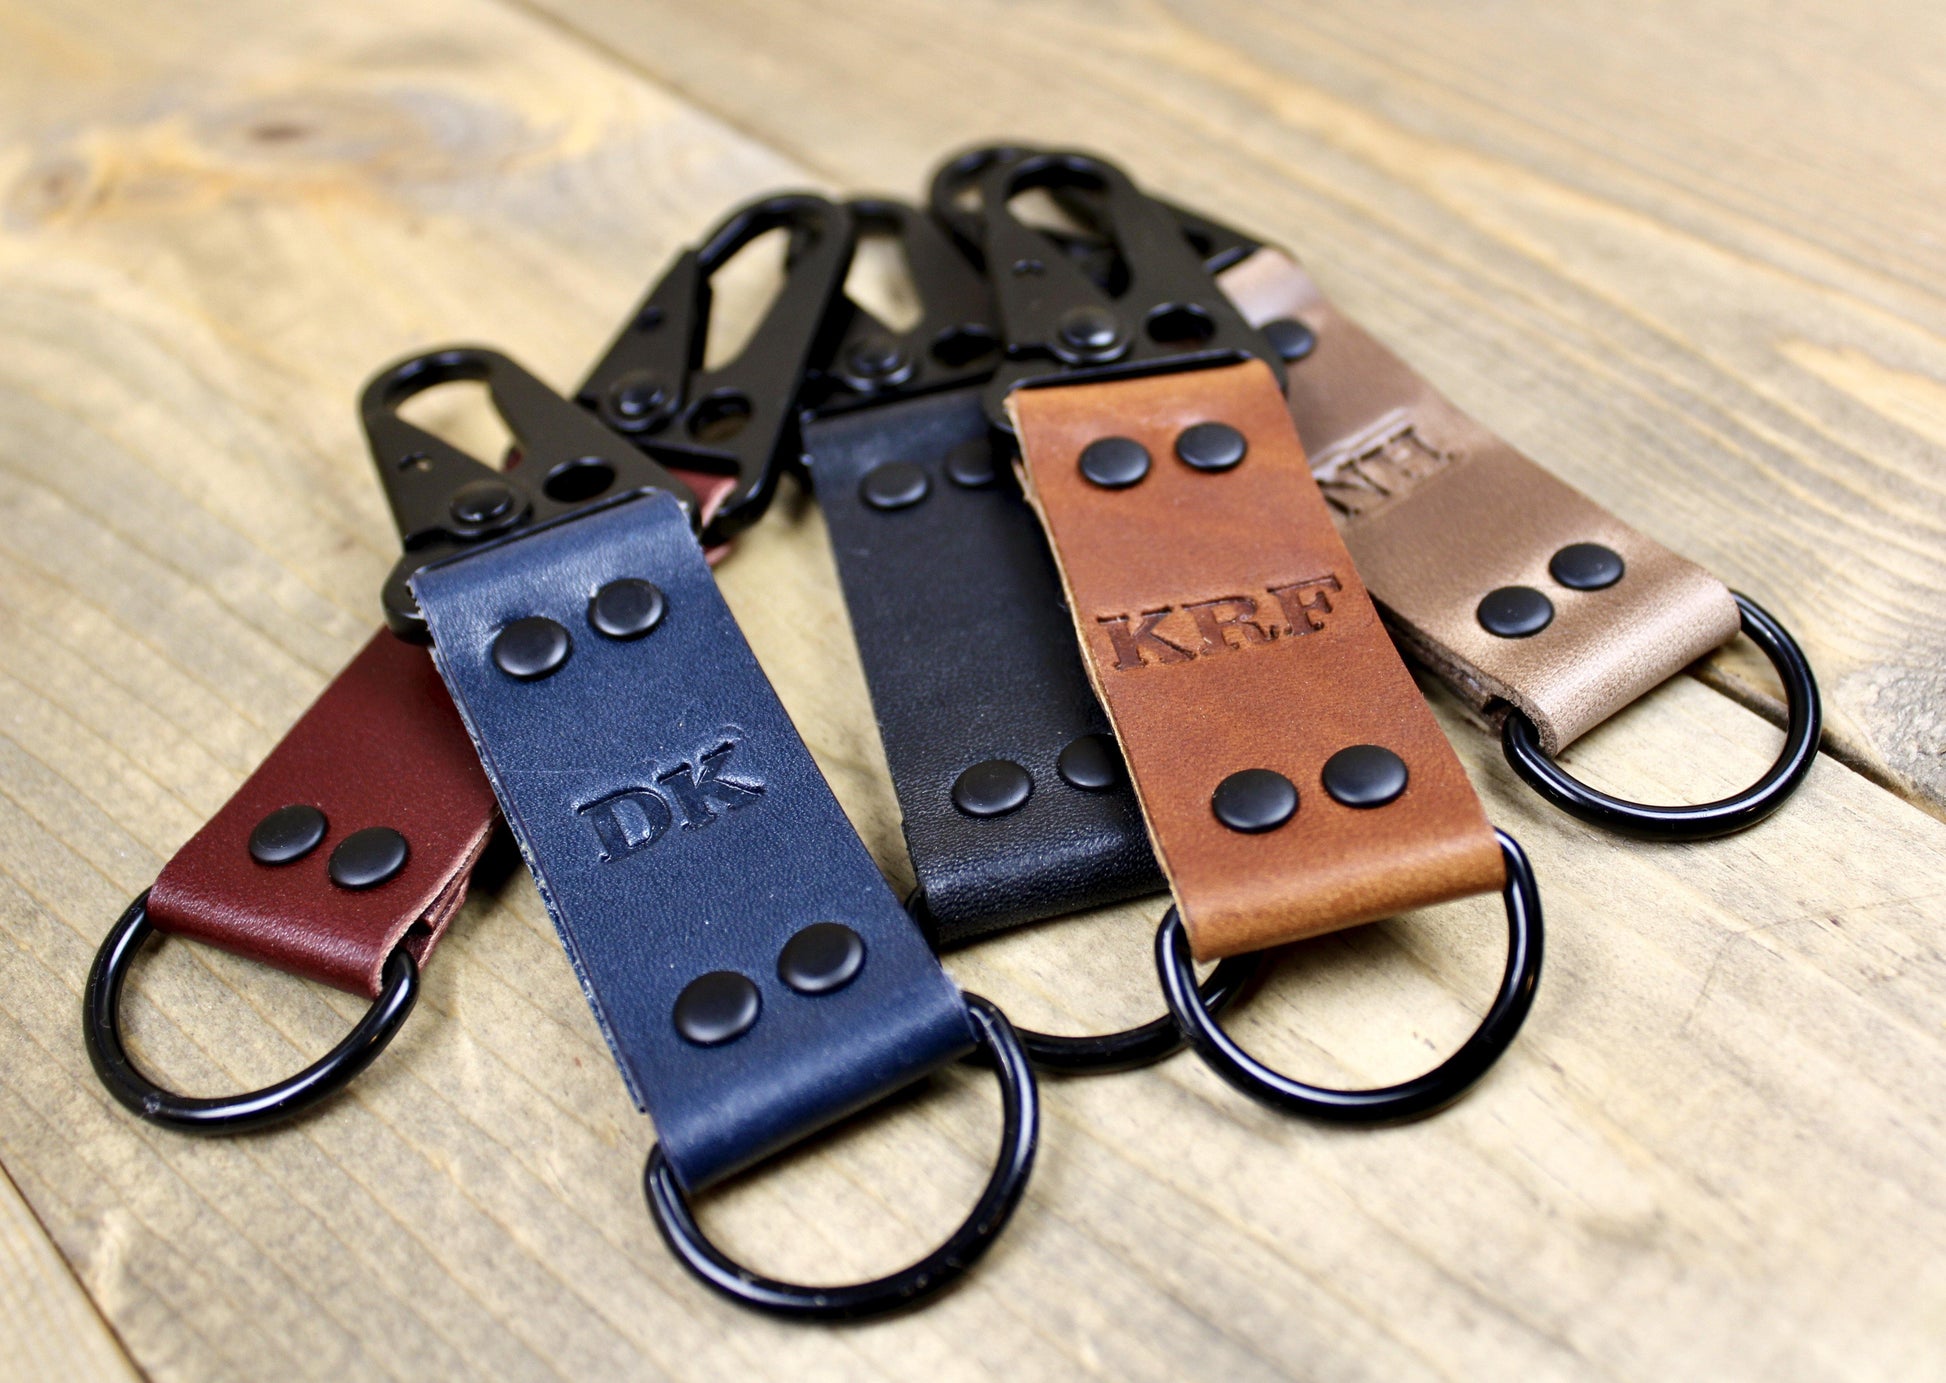 8 HK Clip Keychains That Make Carrying Keys a Snap